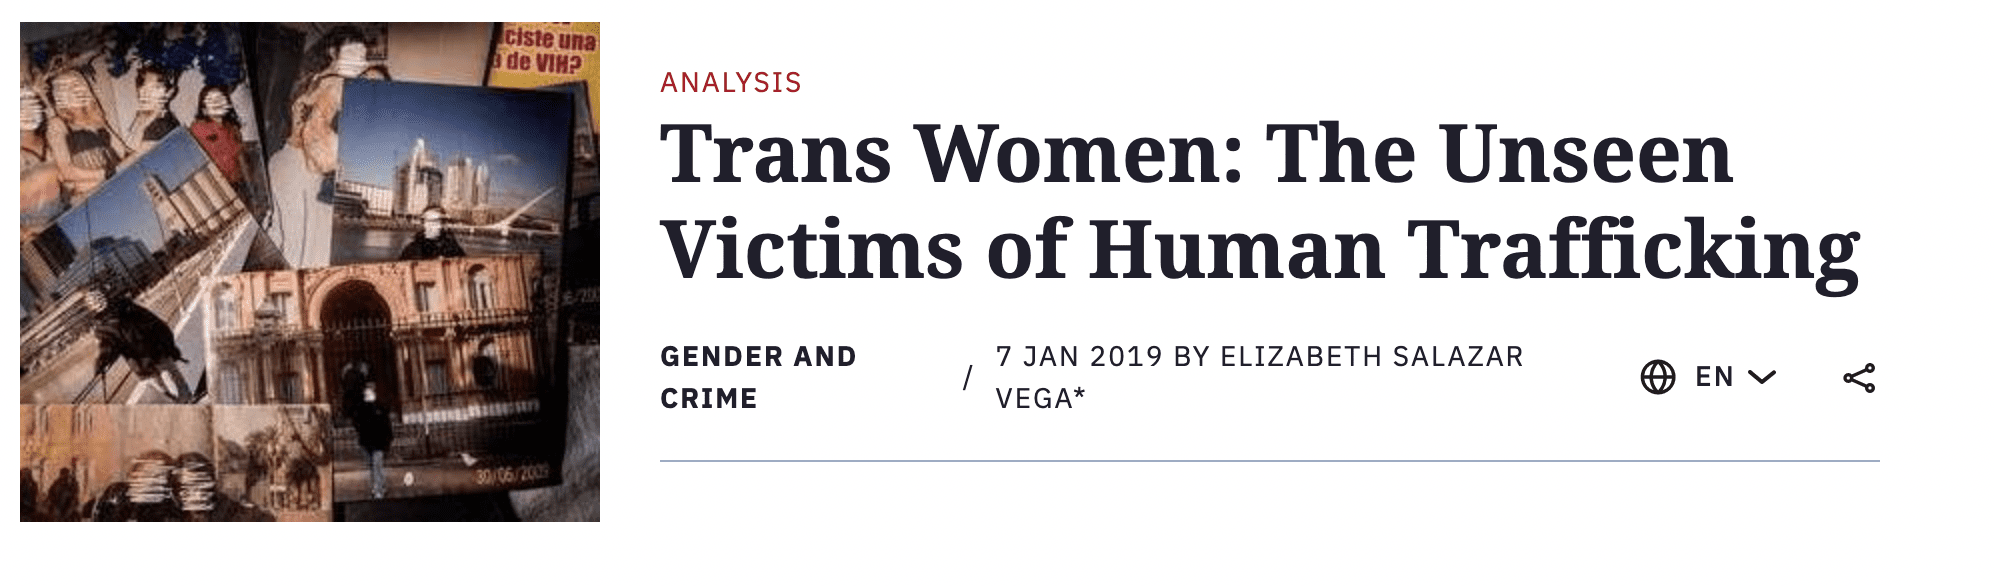 Trans Women: The Unseen Victims of Human Trafficking